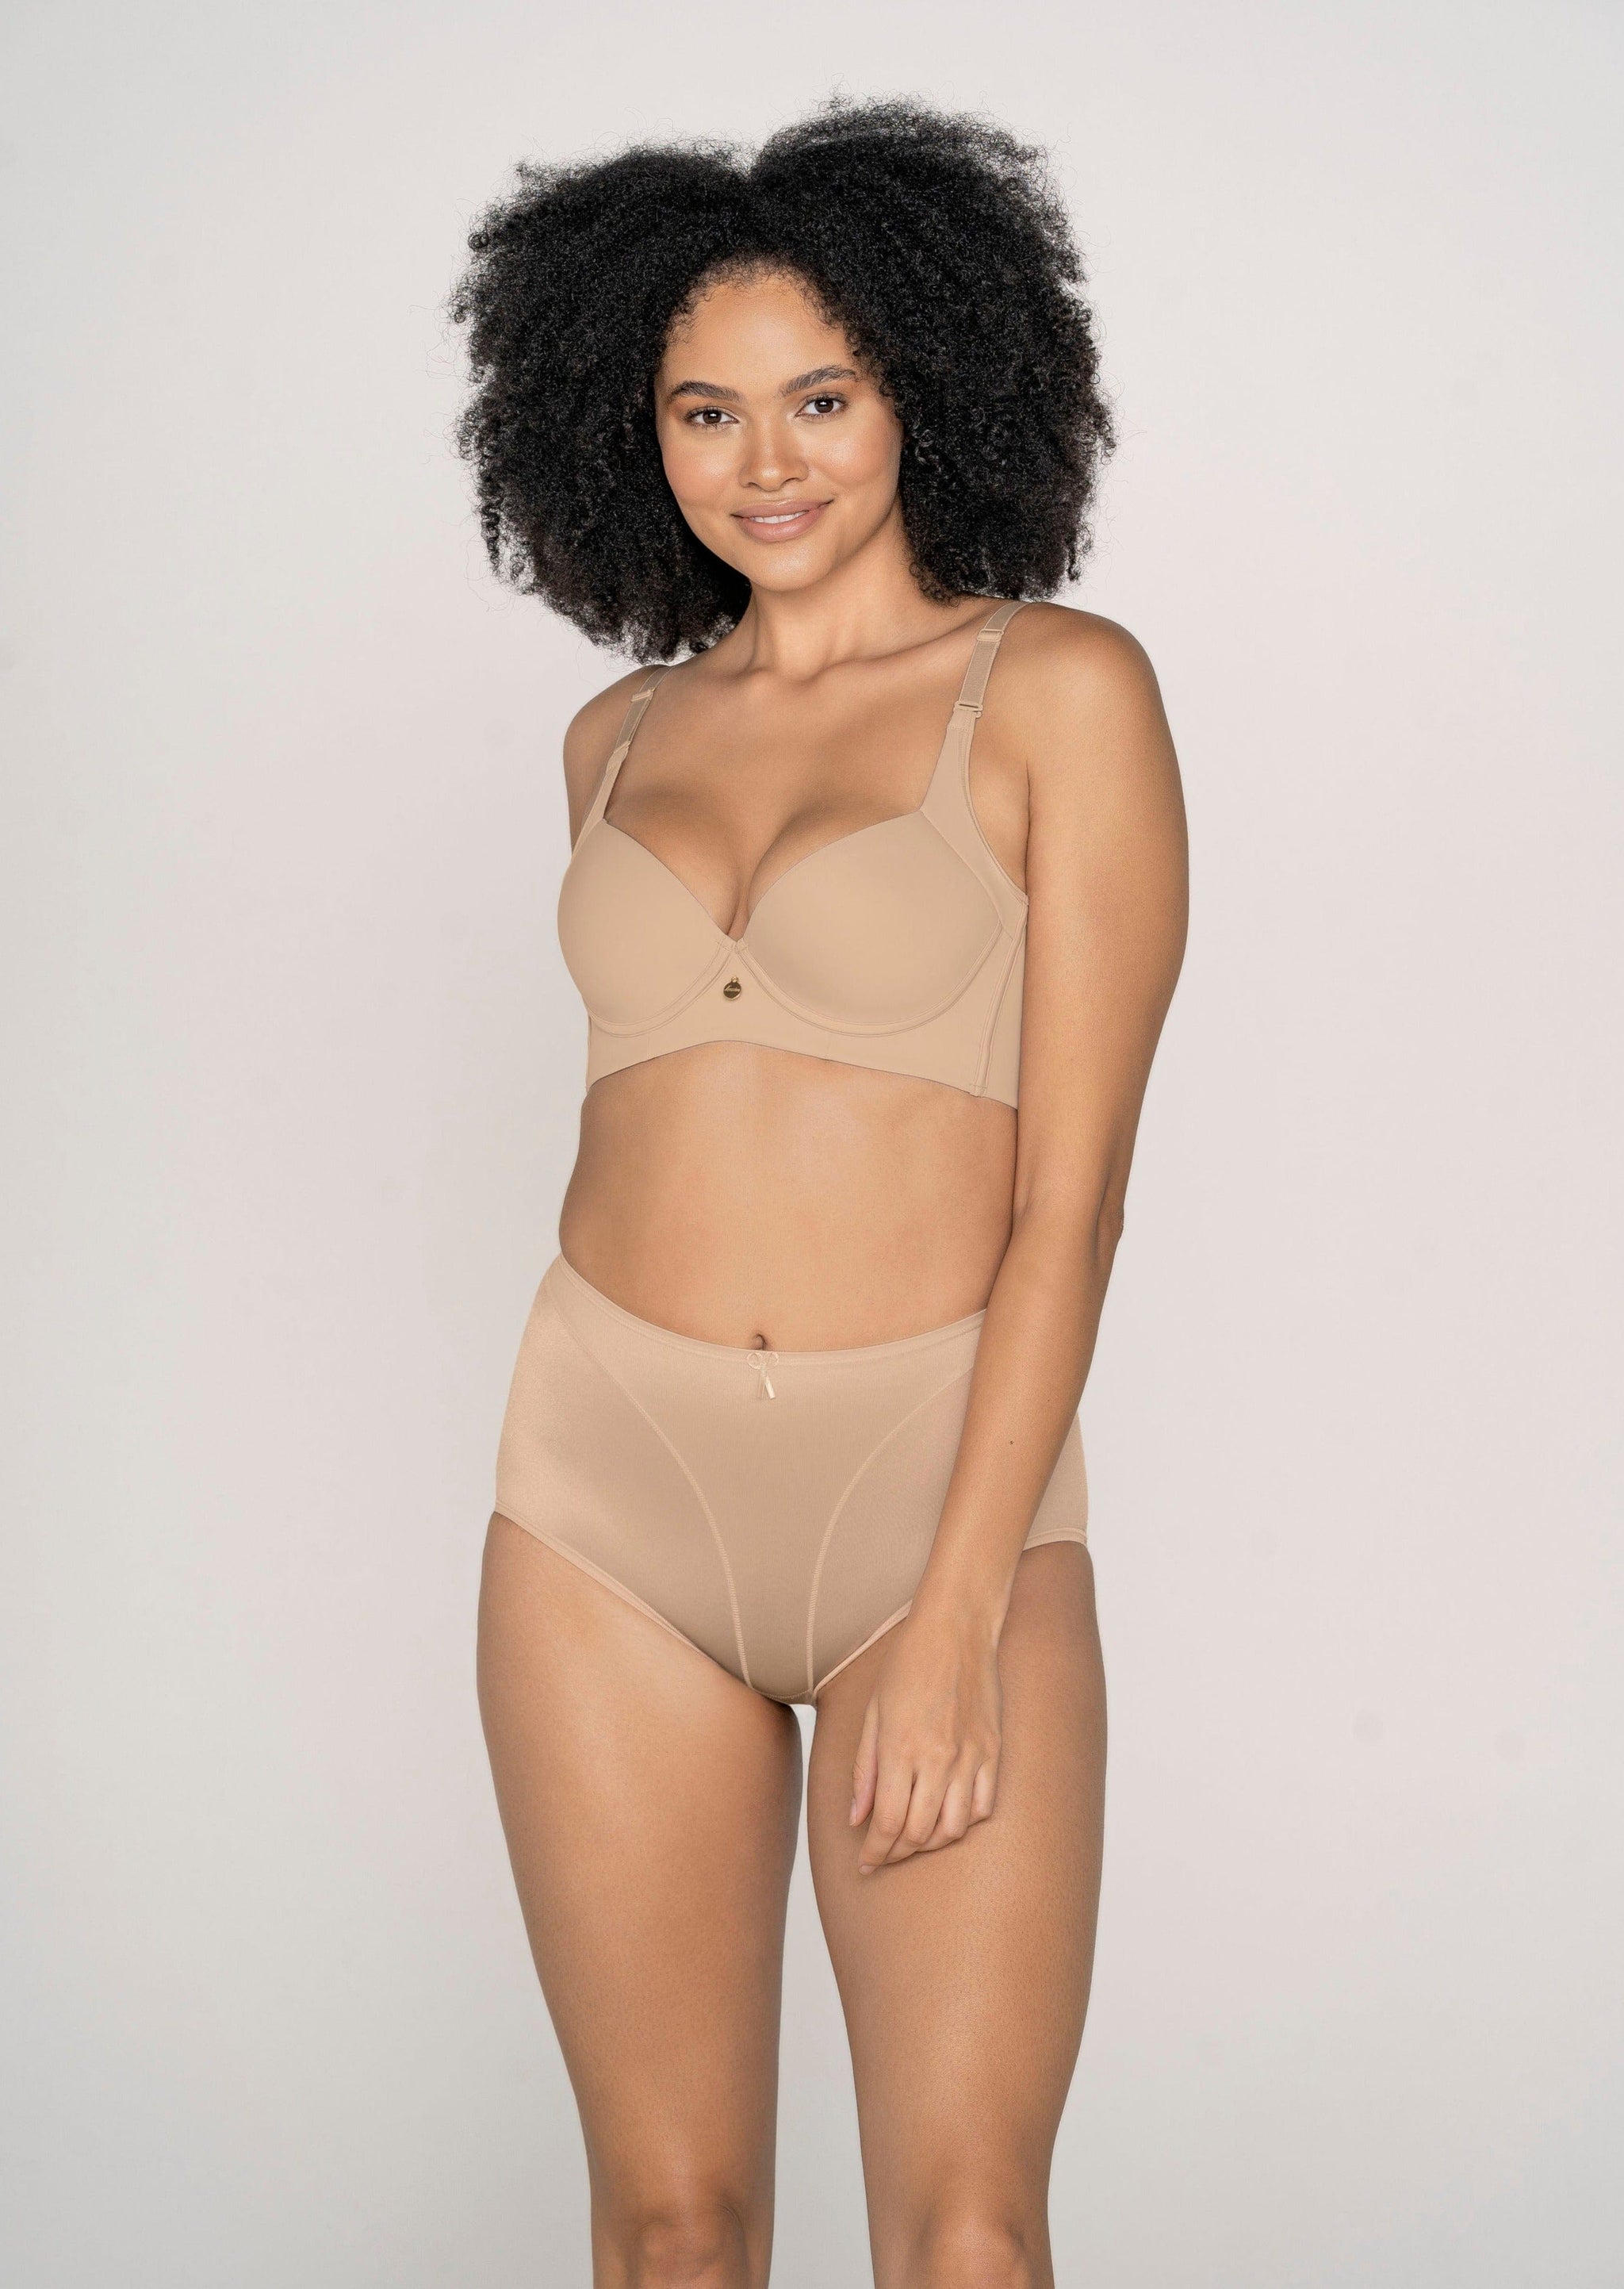 High Profile Back Smoothing Bra with Soft Full Coverage Cups - Nude -  Chérie Amour